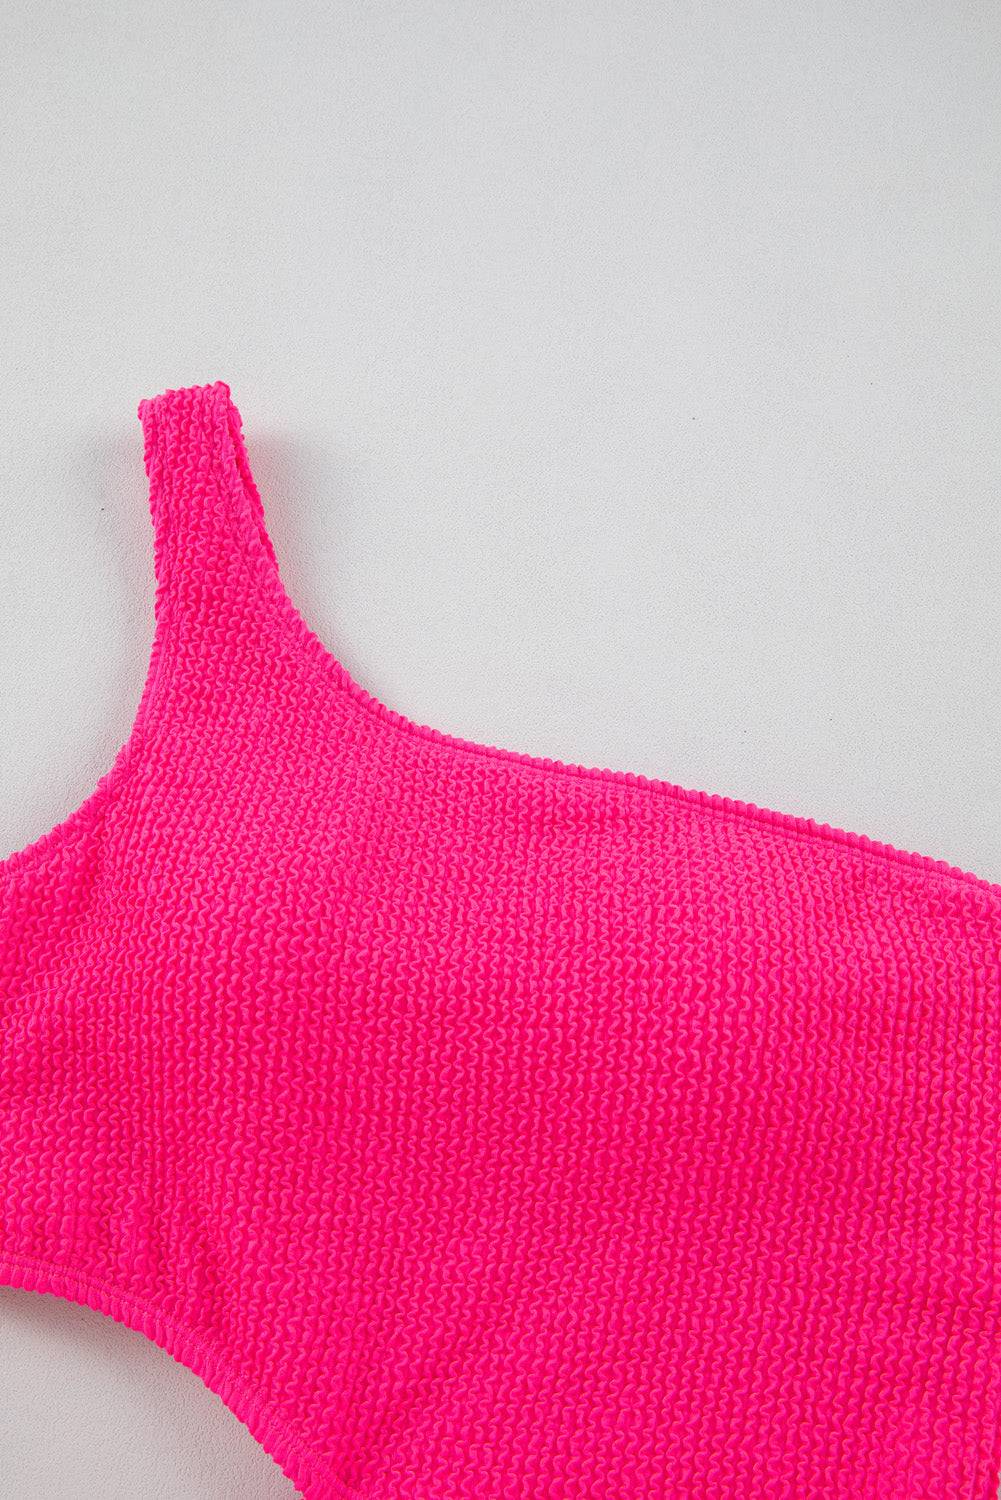 a pink knitted sweater laying on top of a white surface